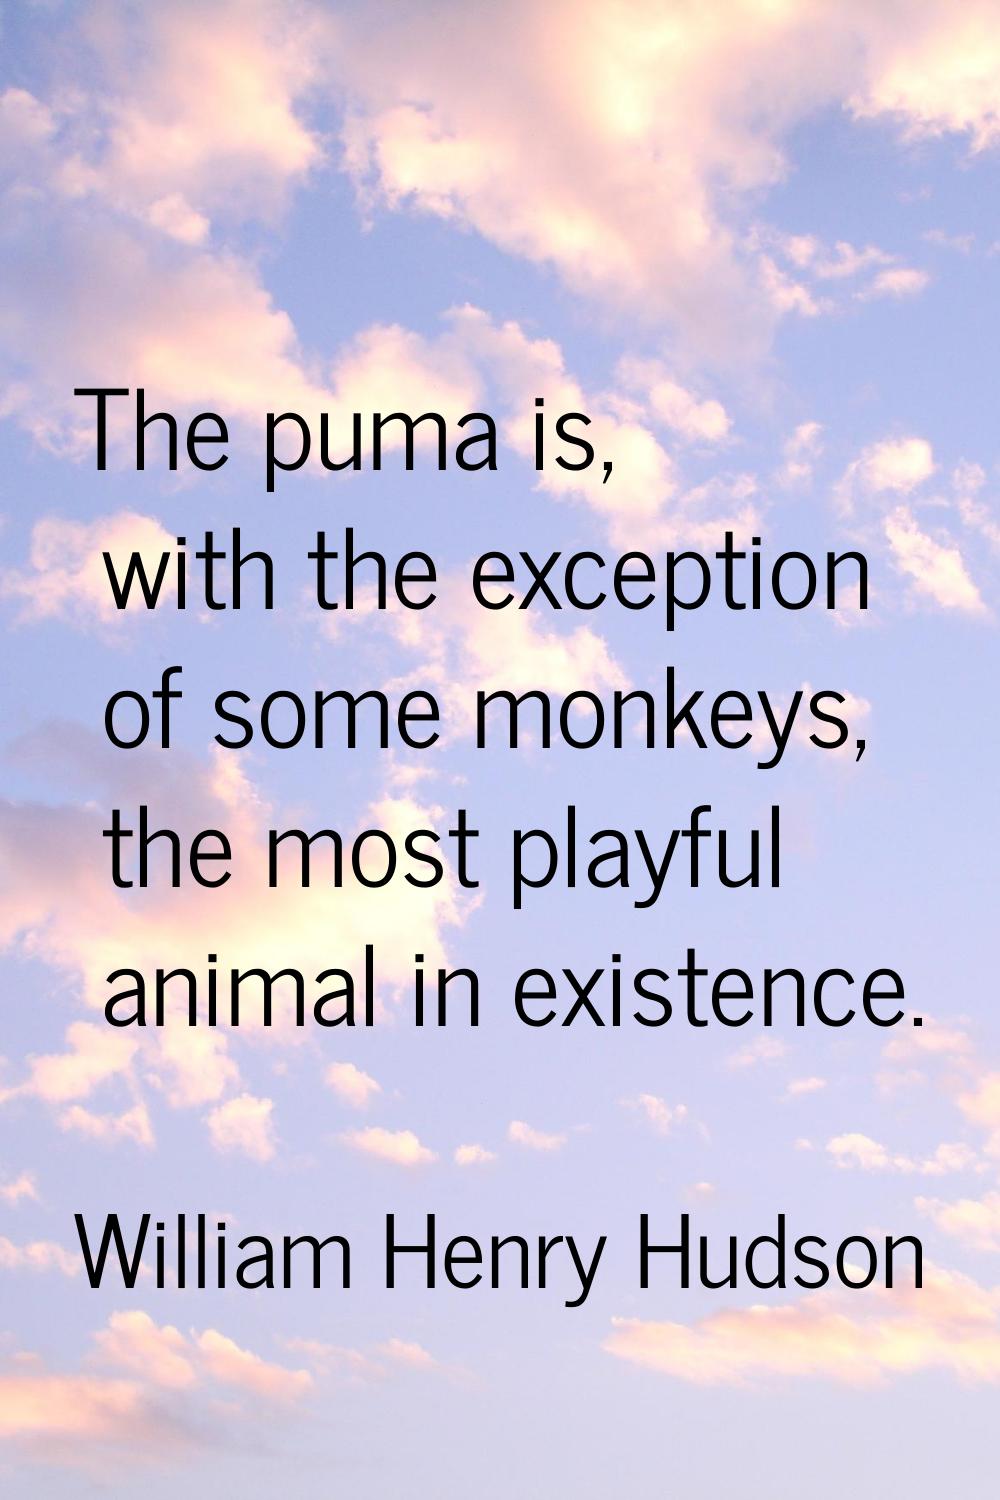 The puma is, with the exception of some monkeys, the most playful animal in existence.